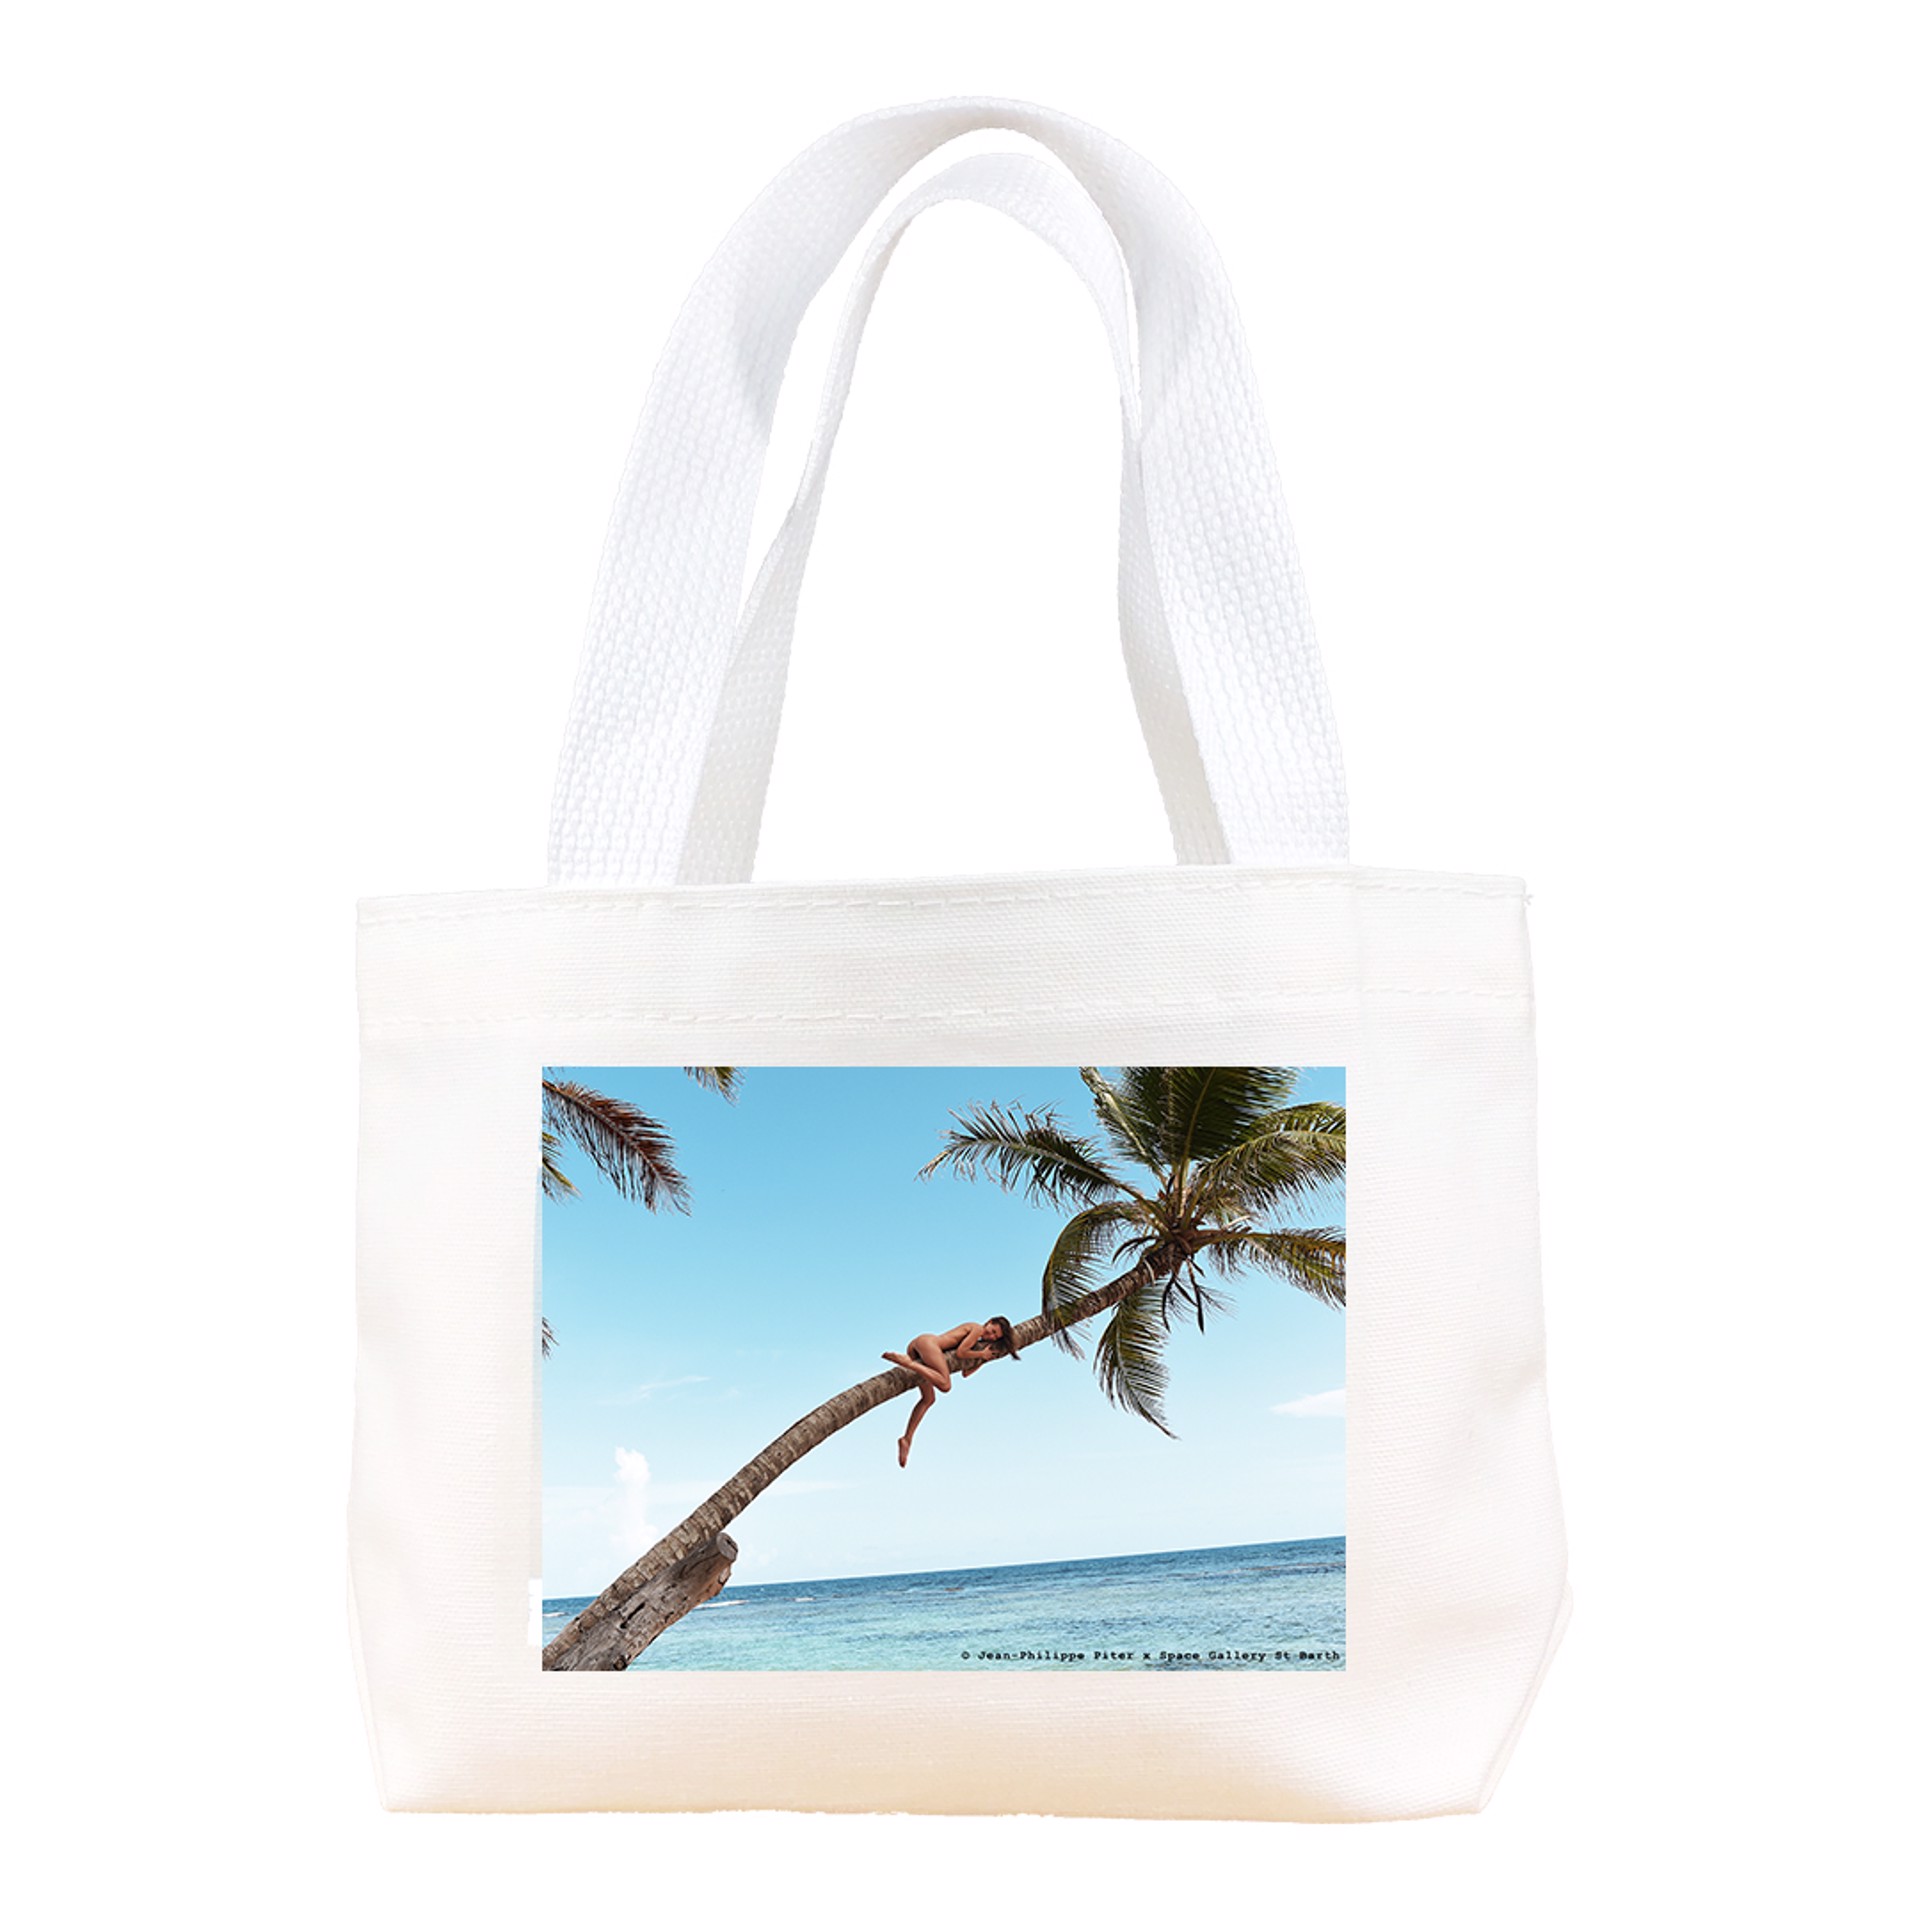 Coconut Tiny Tote (Jean-Philippe Piter x Space Gallery) by Jean-Philippe Piter